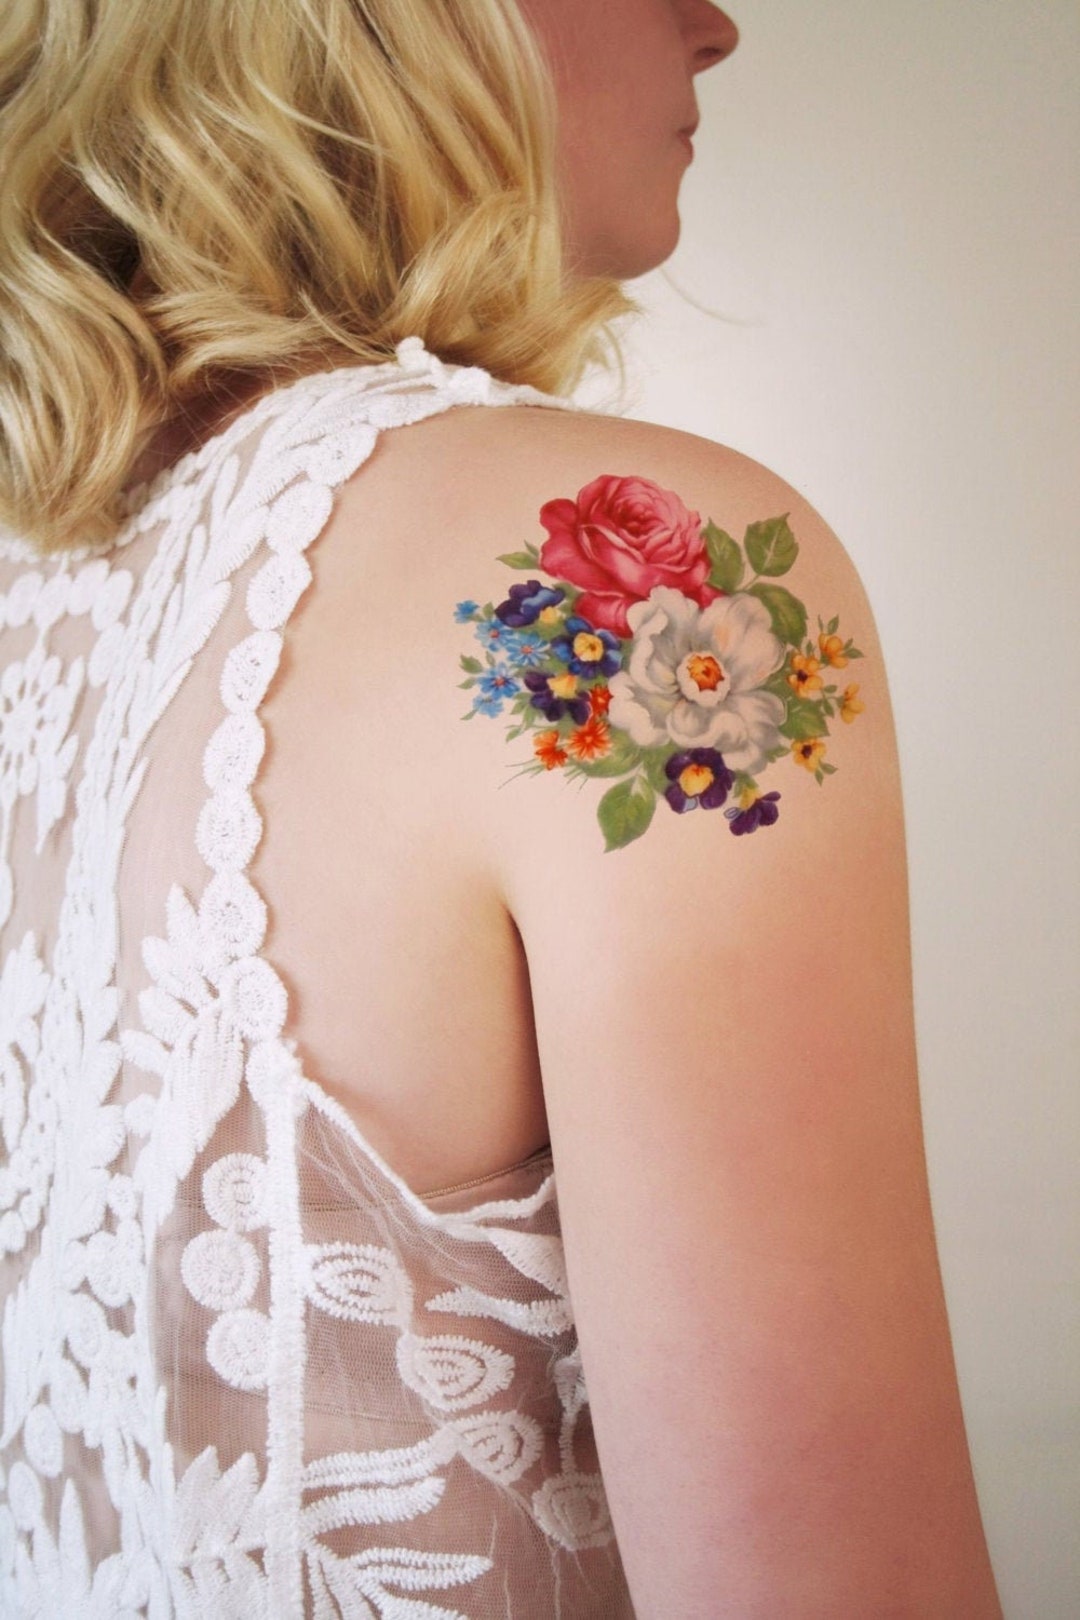 36 Tiny Tattoos to Inspire Your First Ink - YouTube